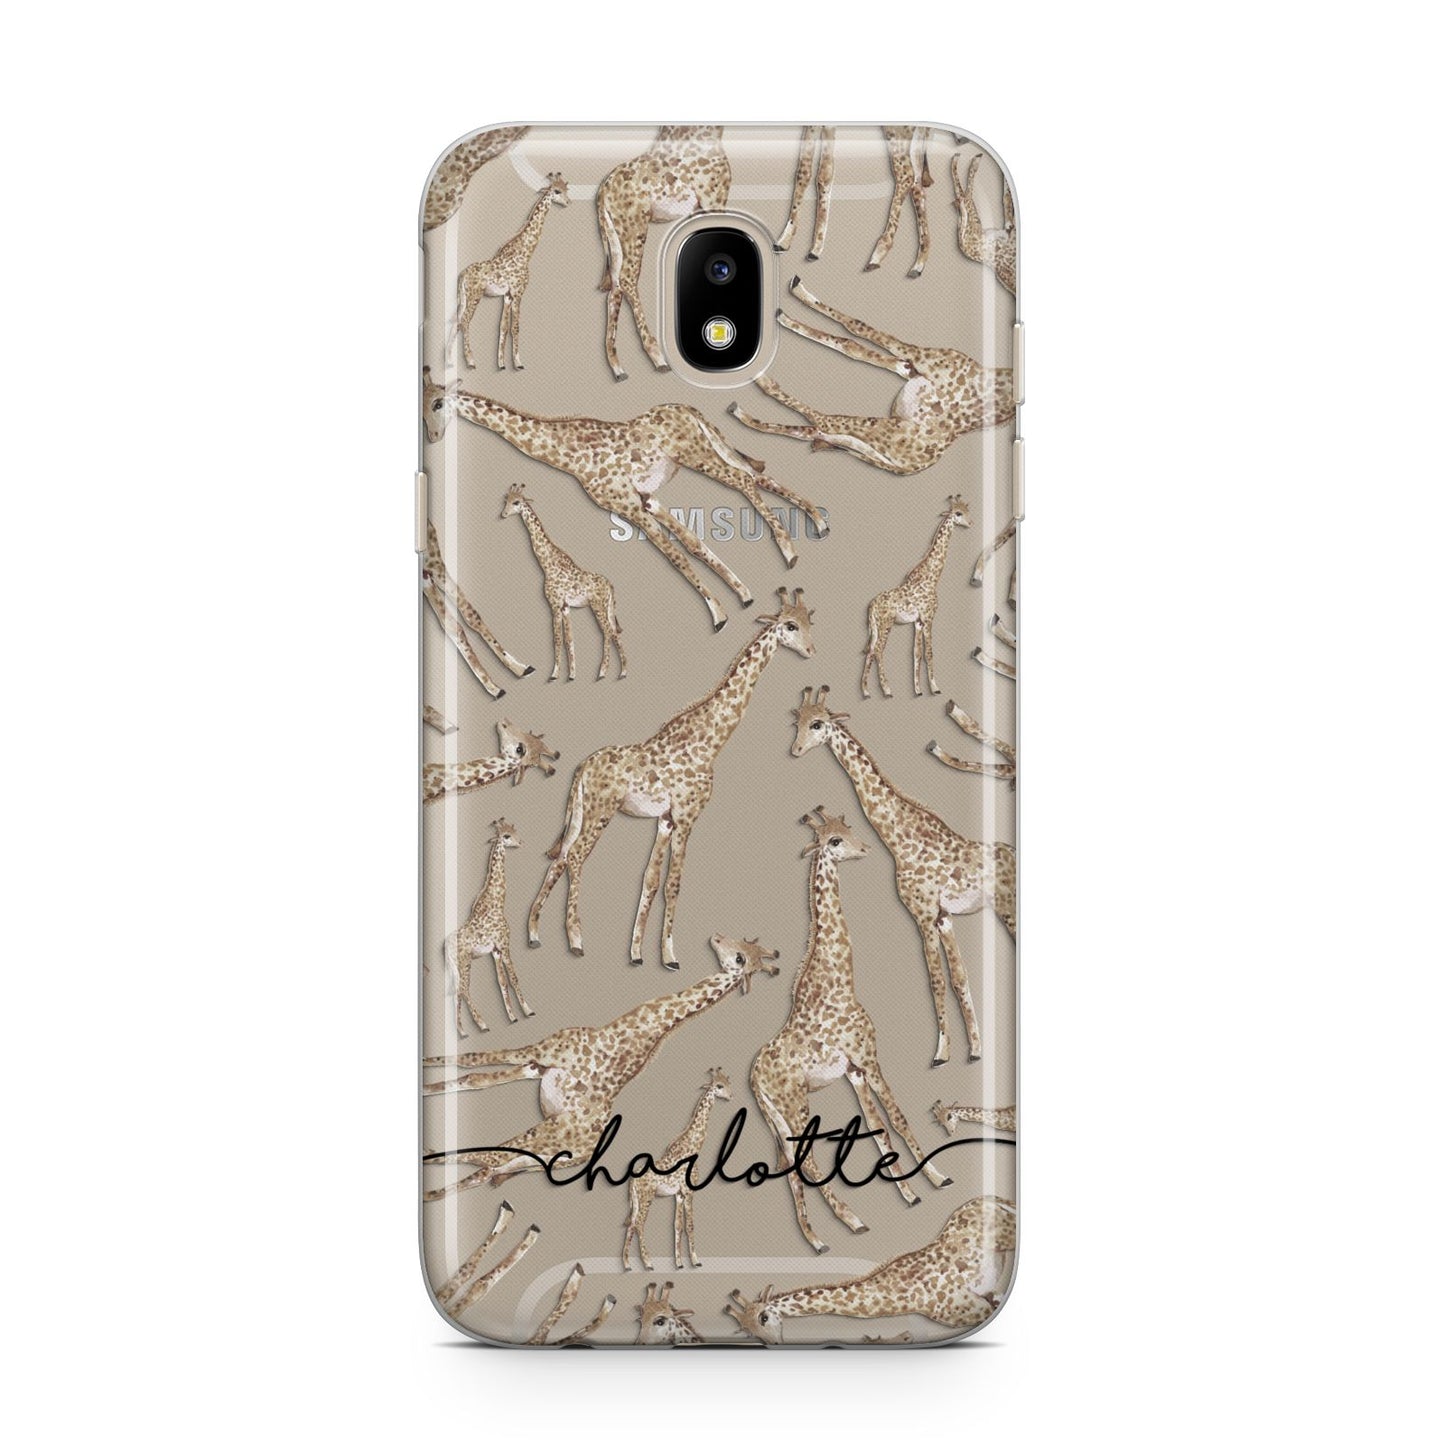 Personalised Giraffes with Name Samsung J5 2017 Case